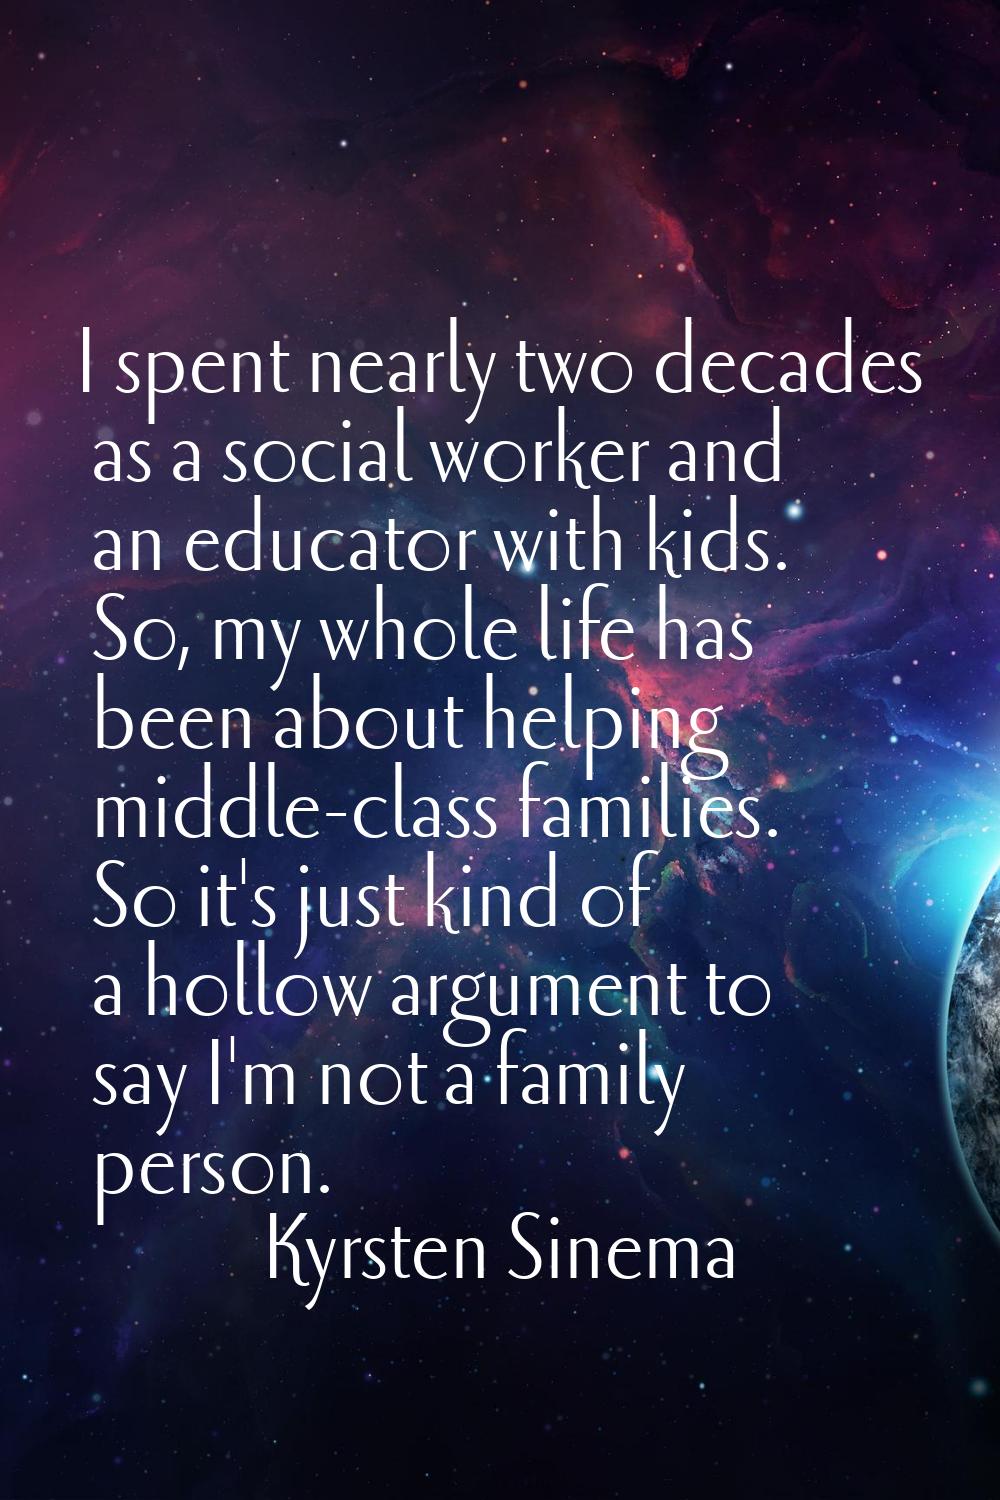 I spent nearly two decades as a social worker and an educator with kids. So, my whole life has been